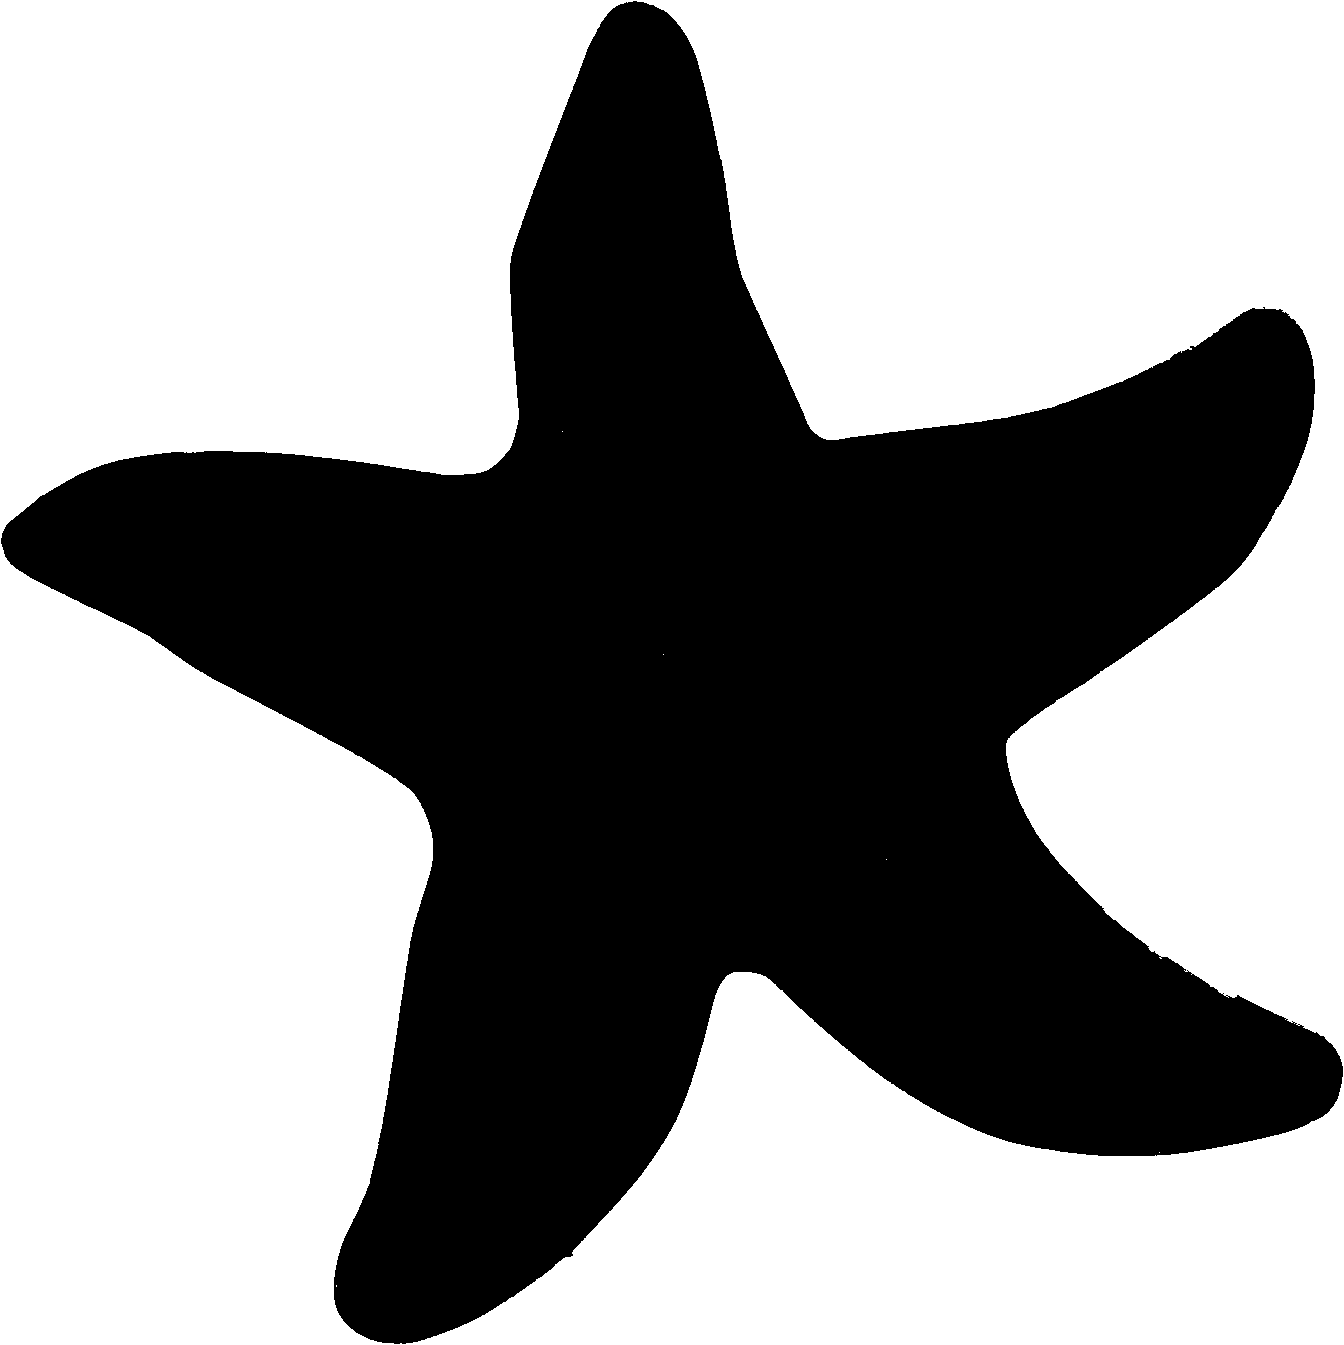 Starfish Outline Clip Art - Free Clipart Images